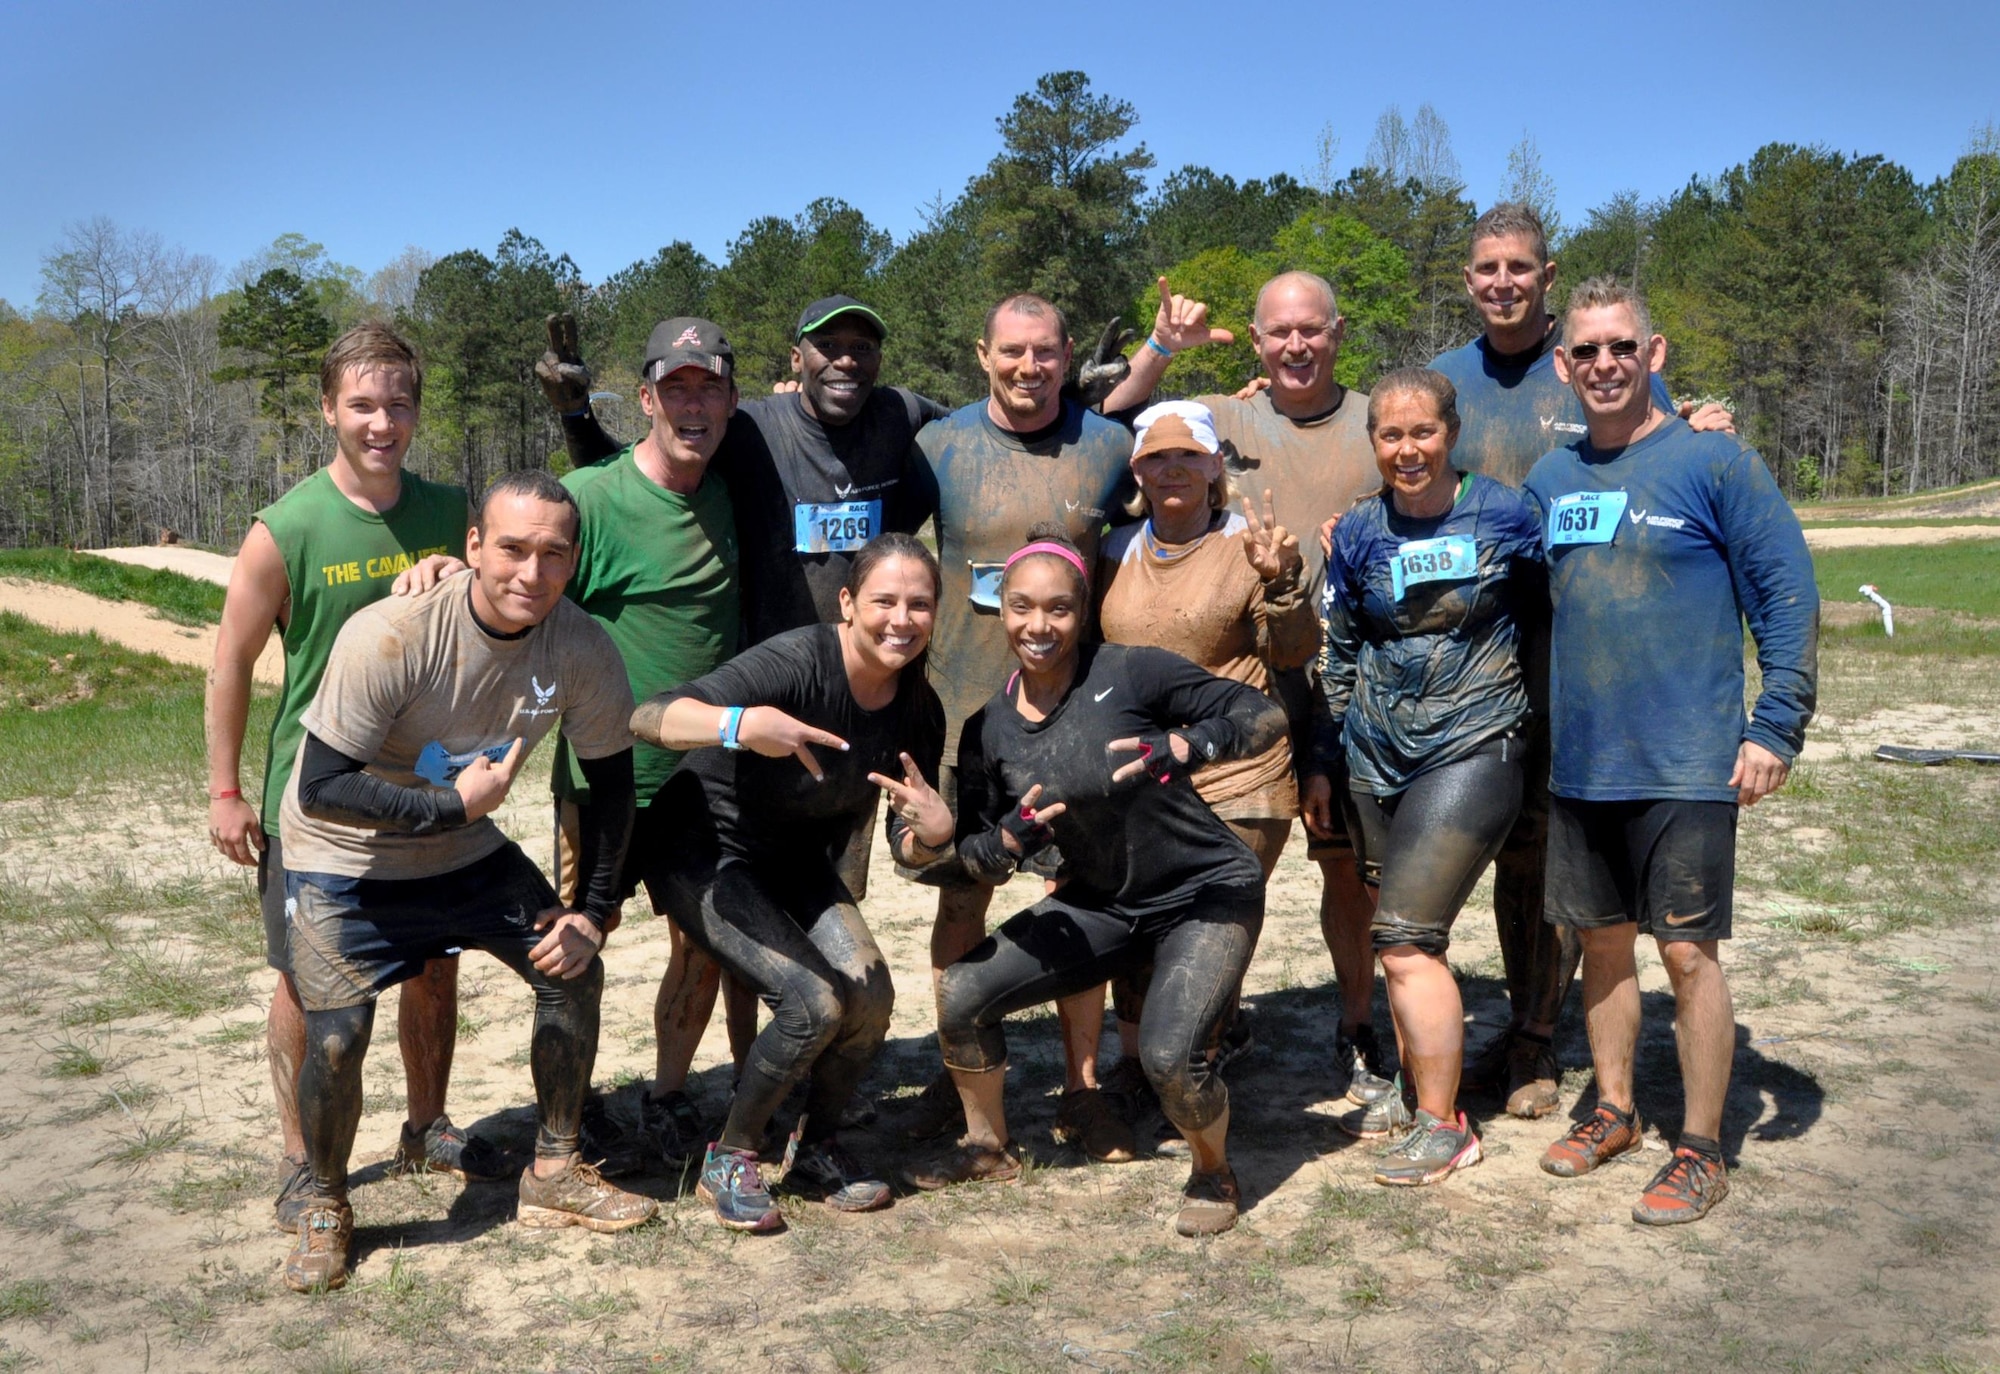 Members of the Dobbins Air Reserve family and many other racers from Georgia experienced heart-pumping, adrenaline-rushing, difficult obstacles and more when they participated in the Savage Race on April 9, 2016 in Dallas, Georgia. The journey was challenging and dirty but the Airmen pushed through, supported one another and emerged victorious at the finish line. (U.S. Air Force photo by Senior Airman Lauren Douglas)